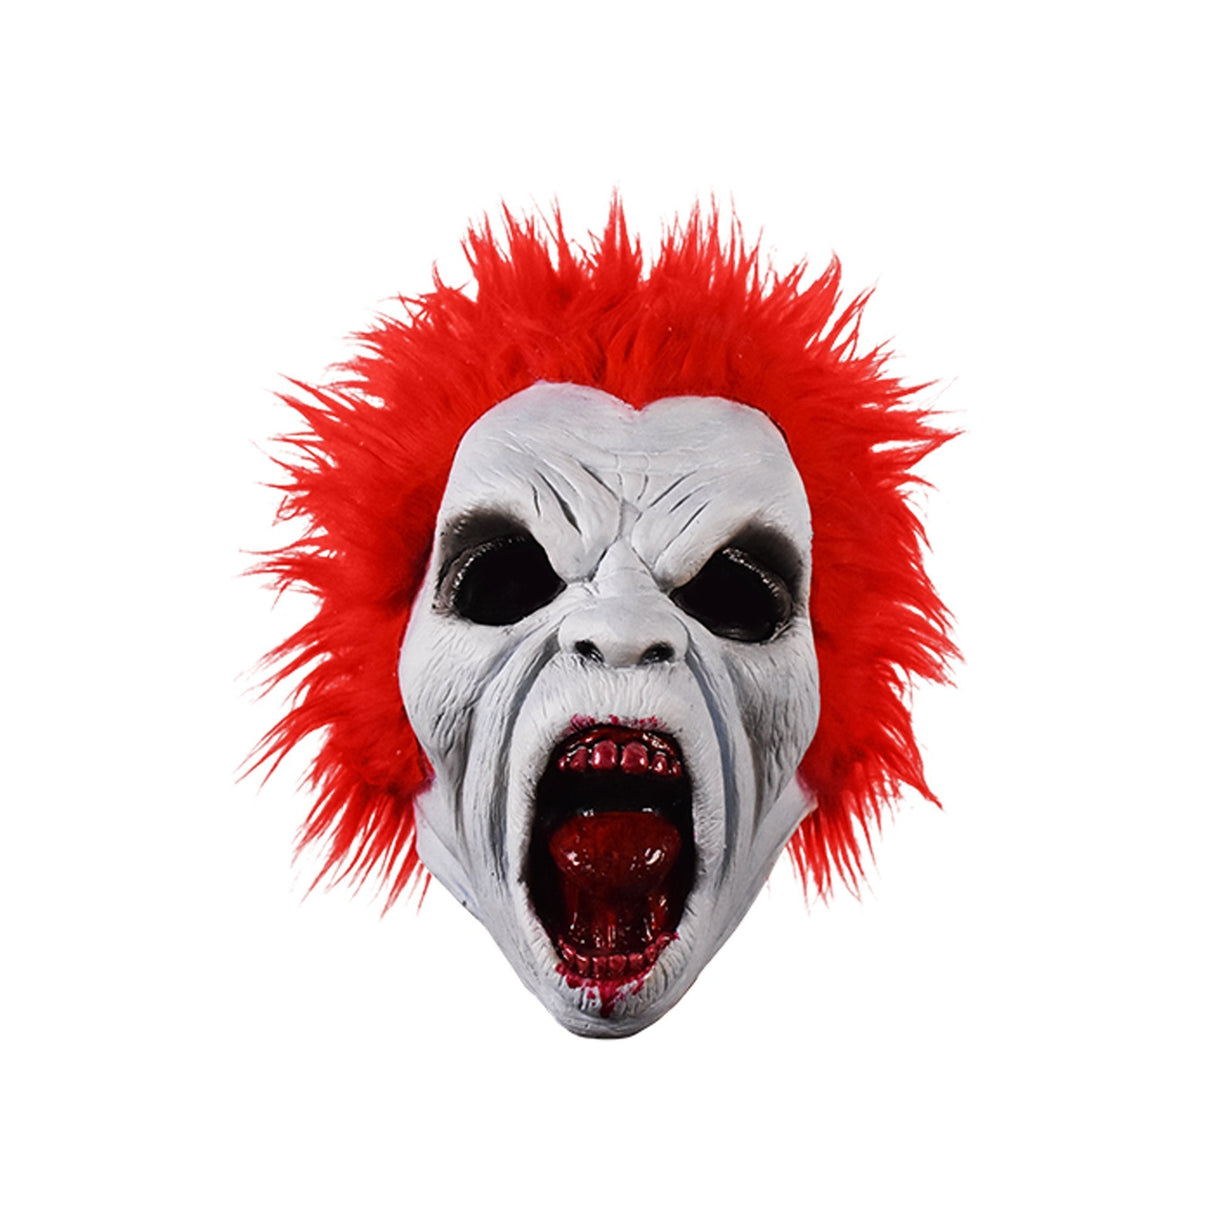 TRICK OR TREAT STUDIOS INC Costume Accessories The Return of the Living Dead Trash Zombie Mask for Adults 811501031284